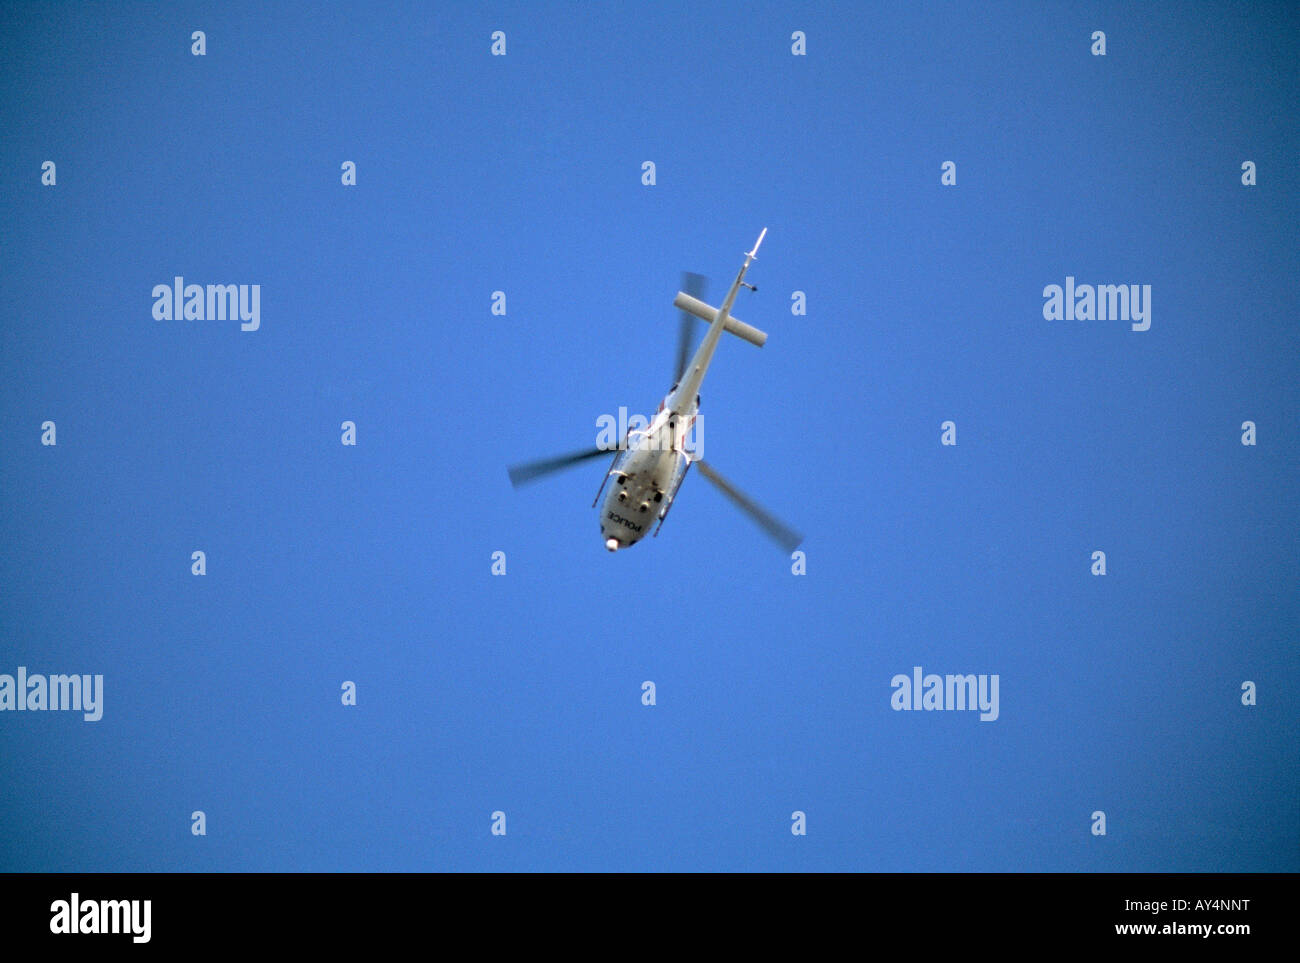 Police helicopter hovering Stock Photo